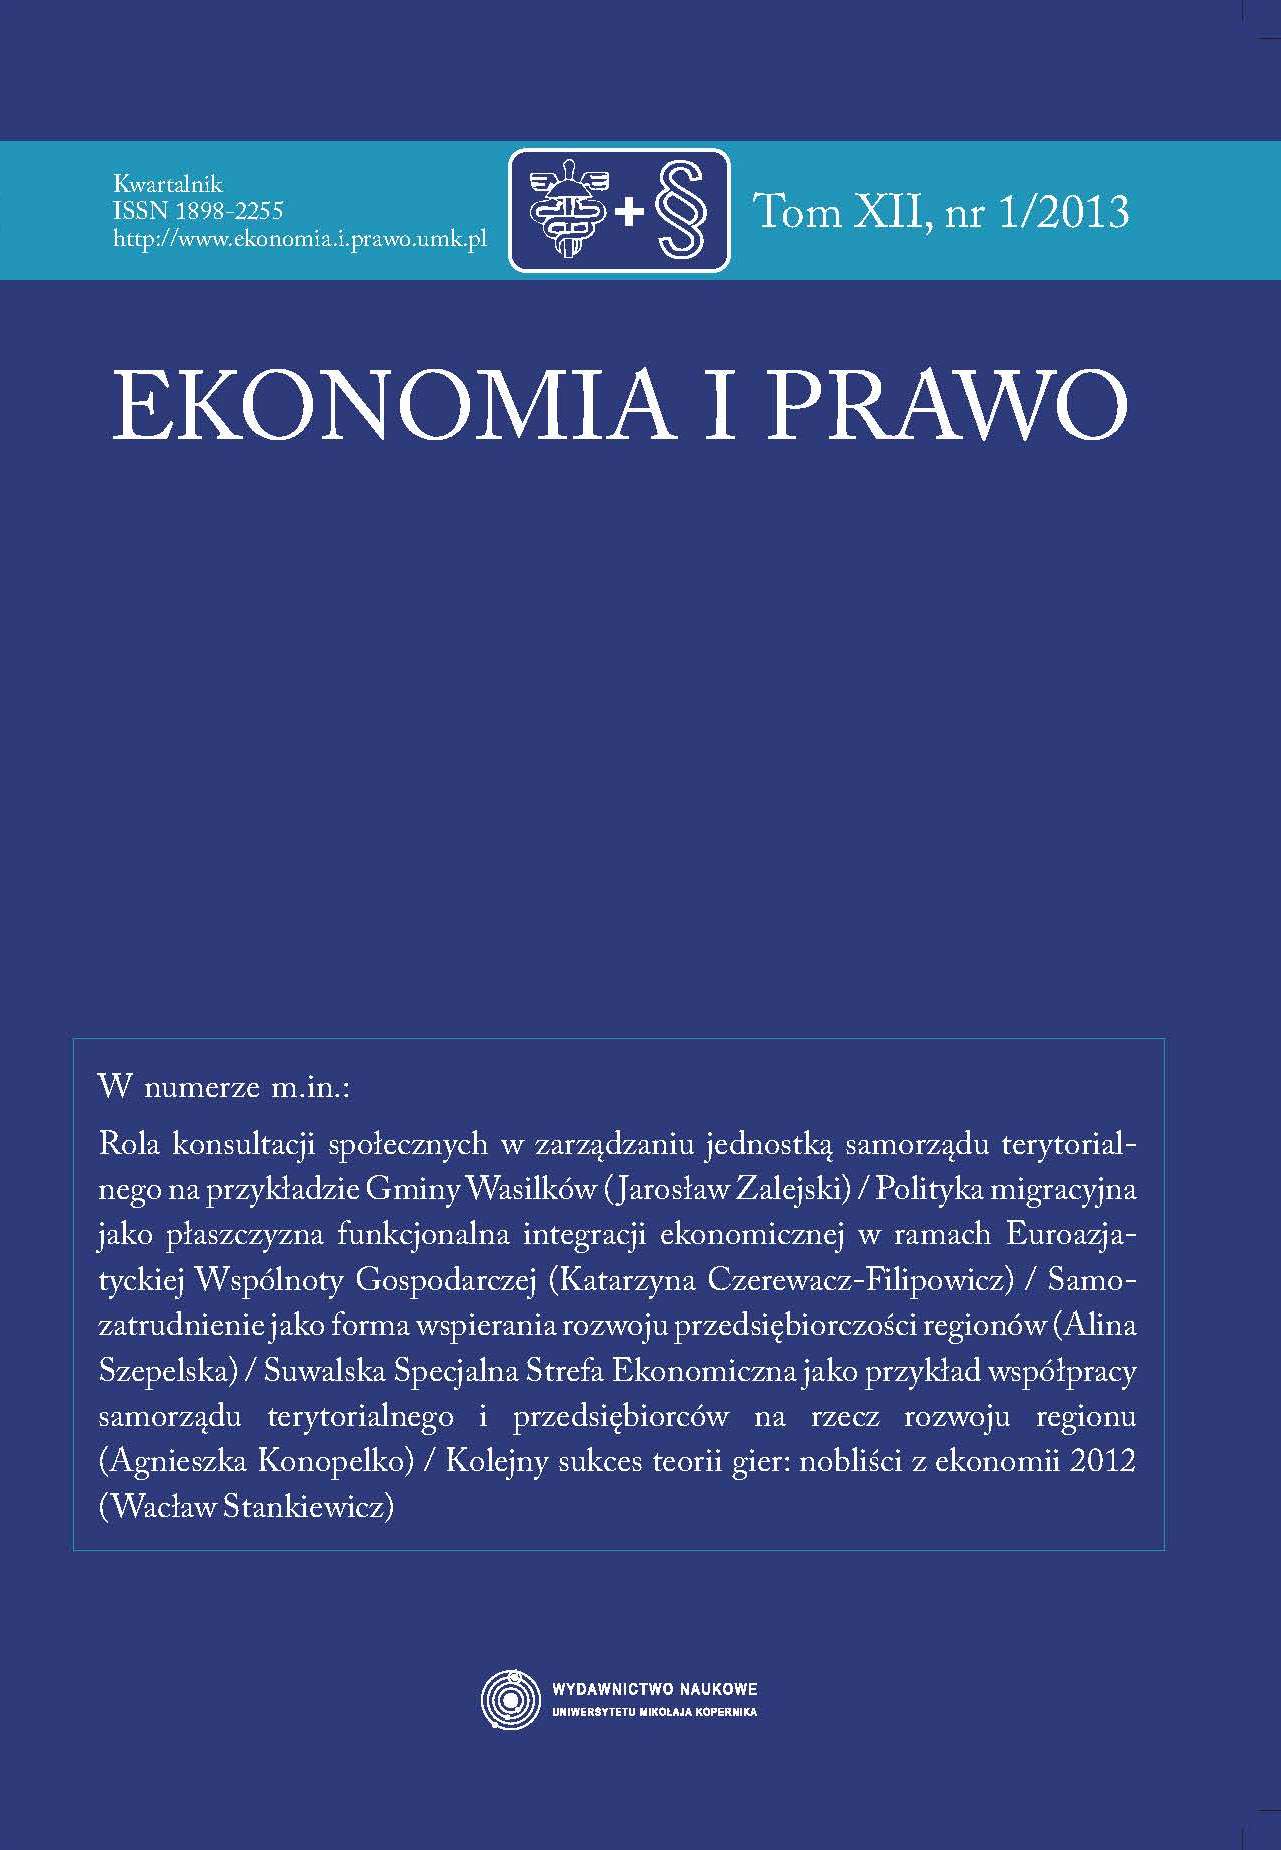 THE ROLE OF SOCIAL CONSULTATION IN THE MANAGEMENT OF A LOCAL GOVERNMENT UNIT: THE CASE STUDY OF WASILKÓW Cover Image